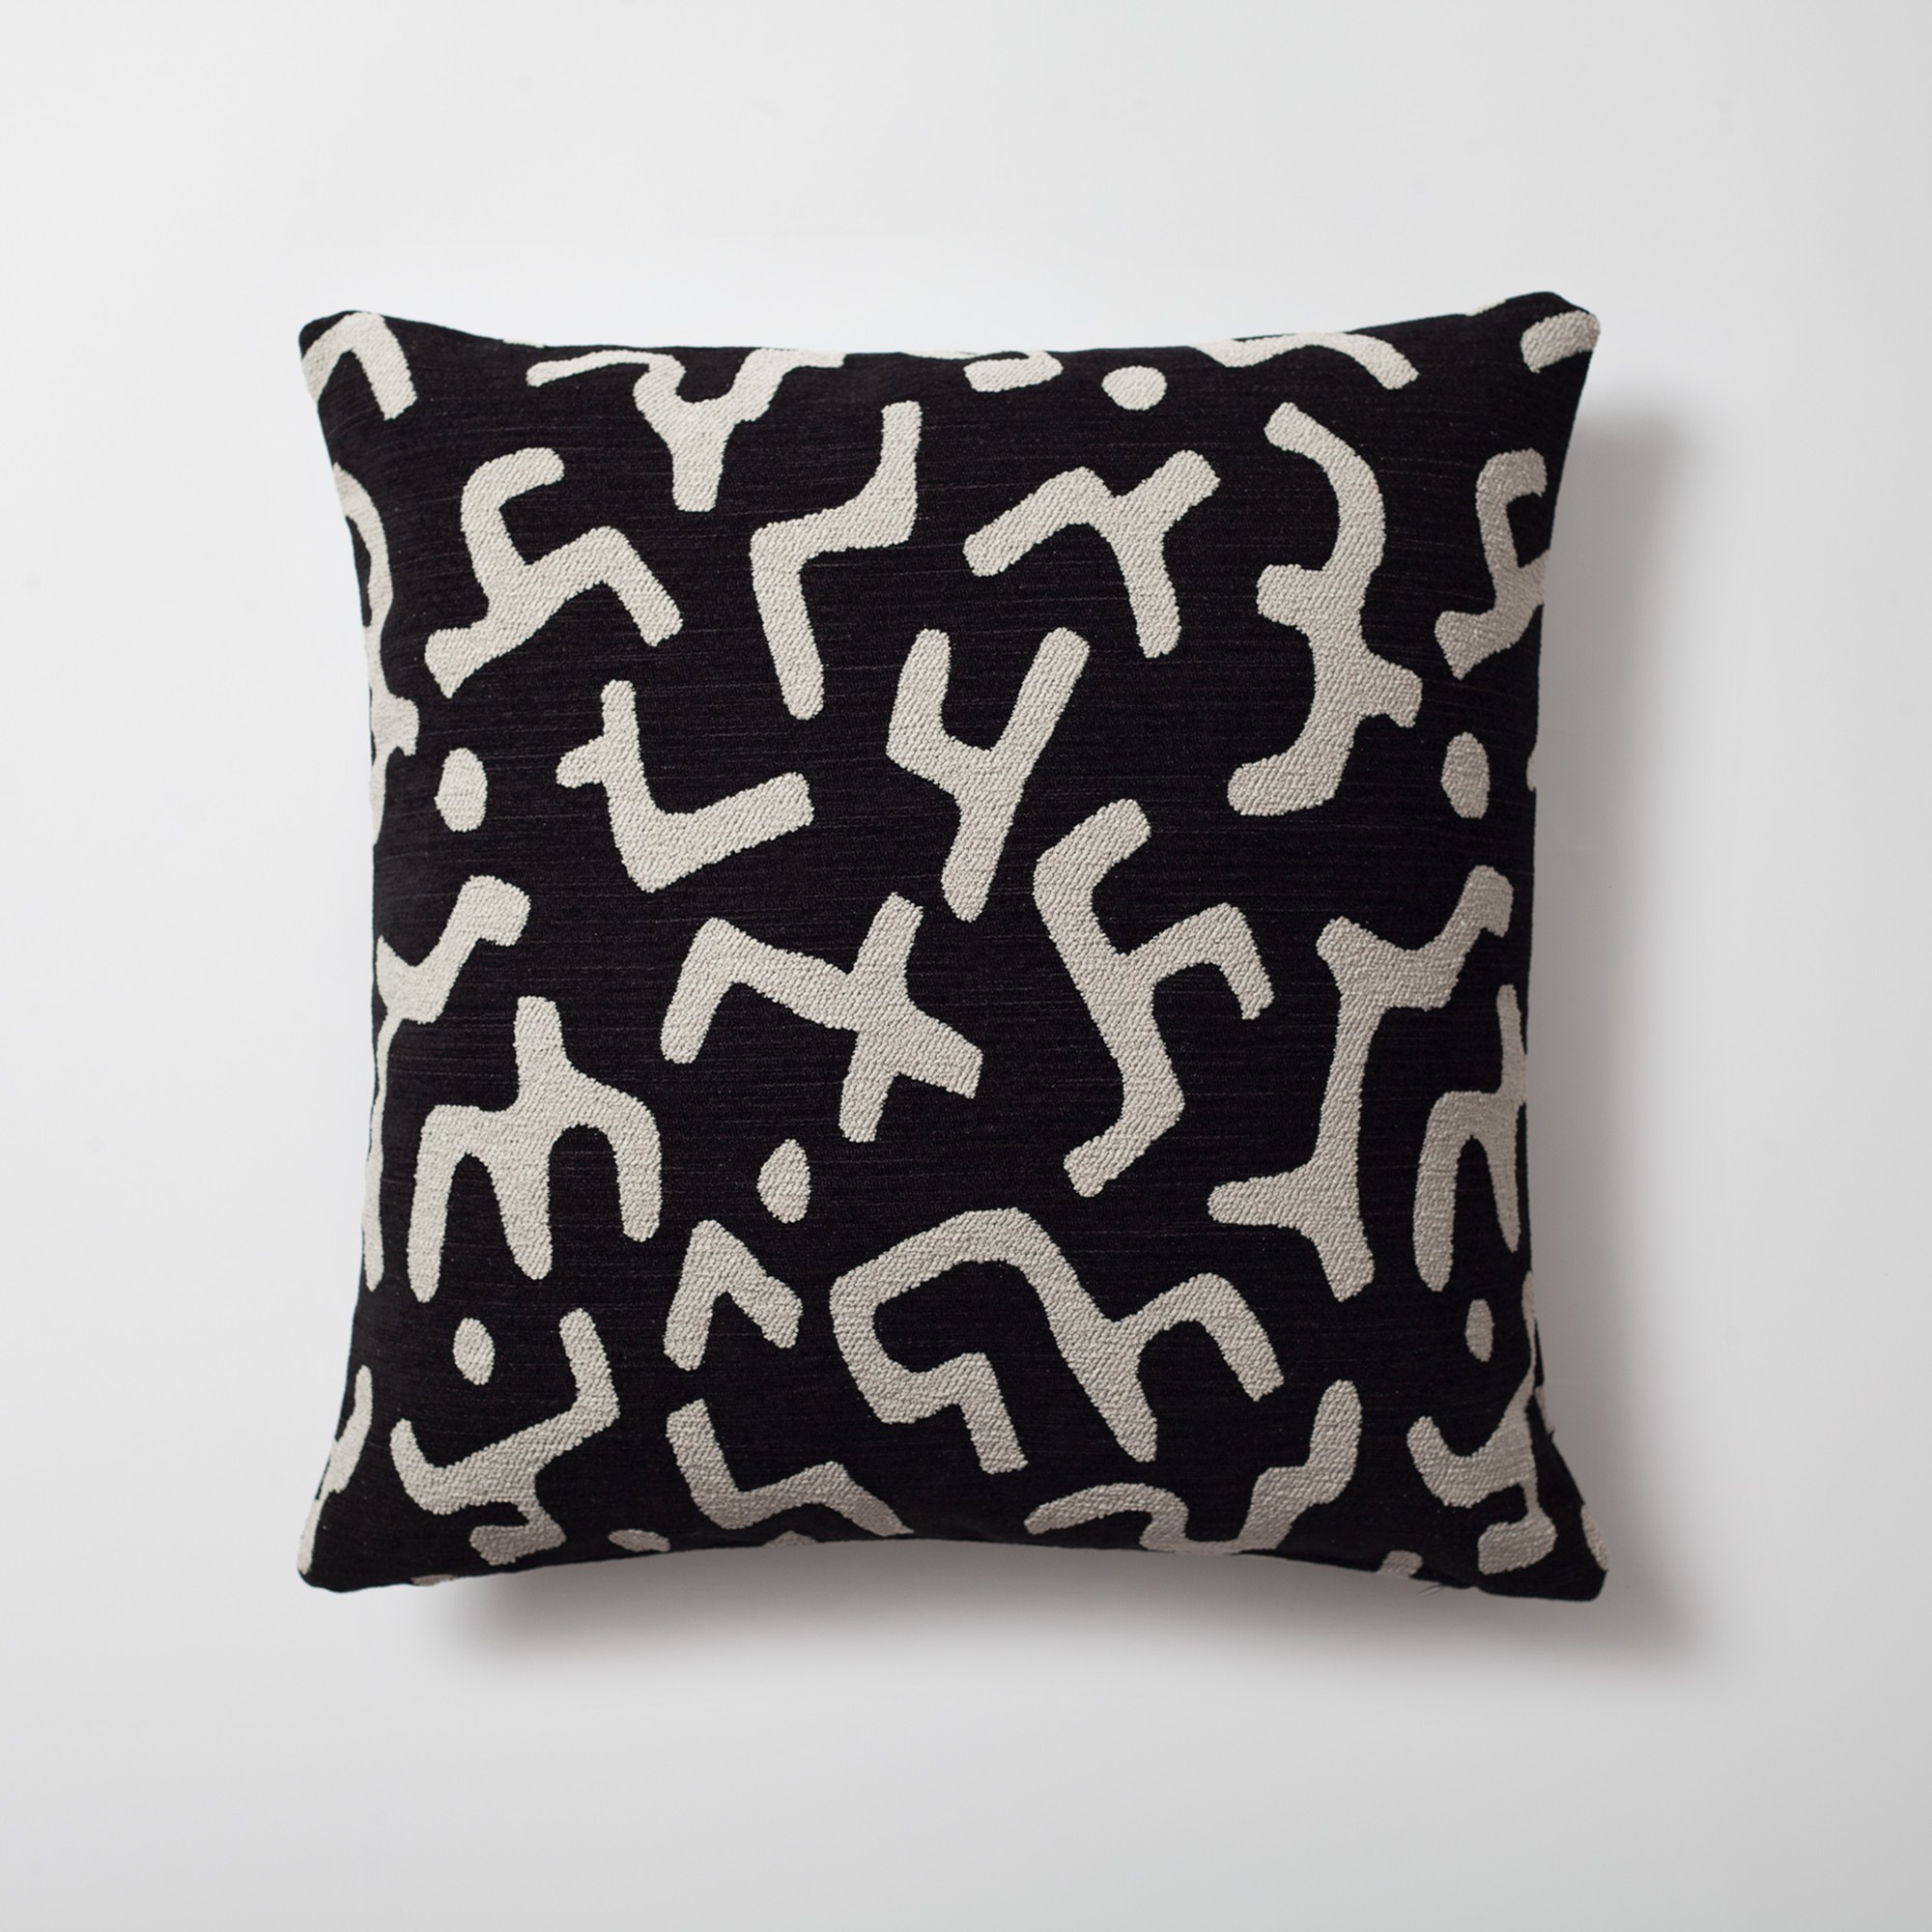 "Nandos" - Maze Patterned 20x20 Inch Pillow - Black (Cover Only)